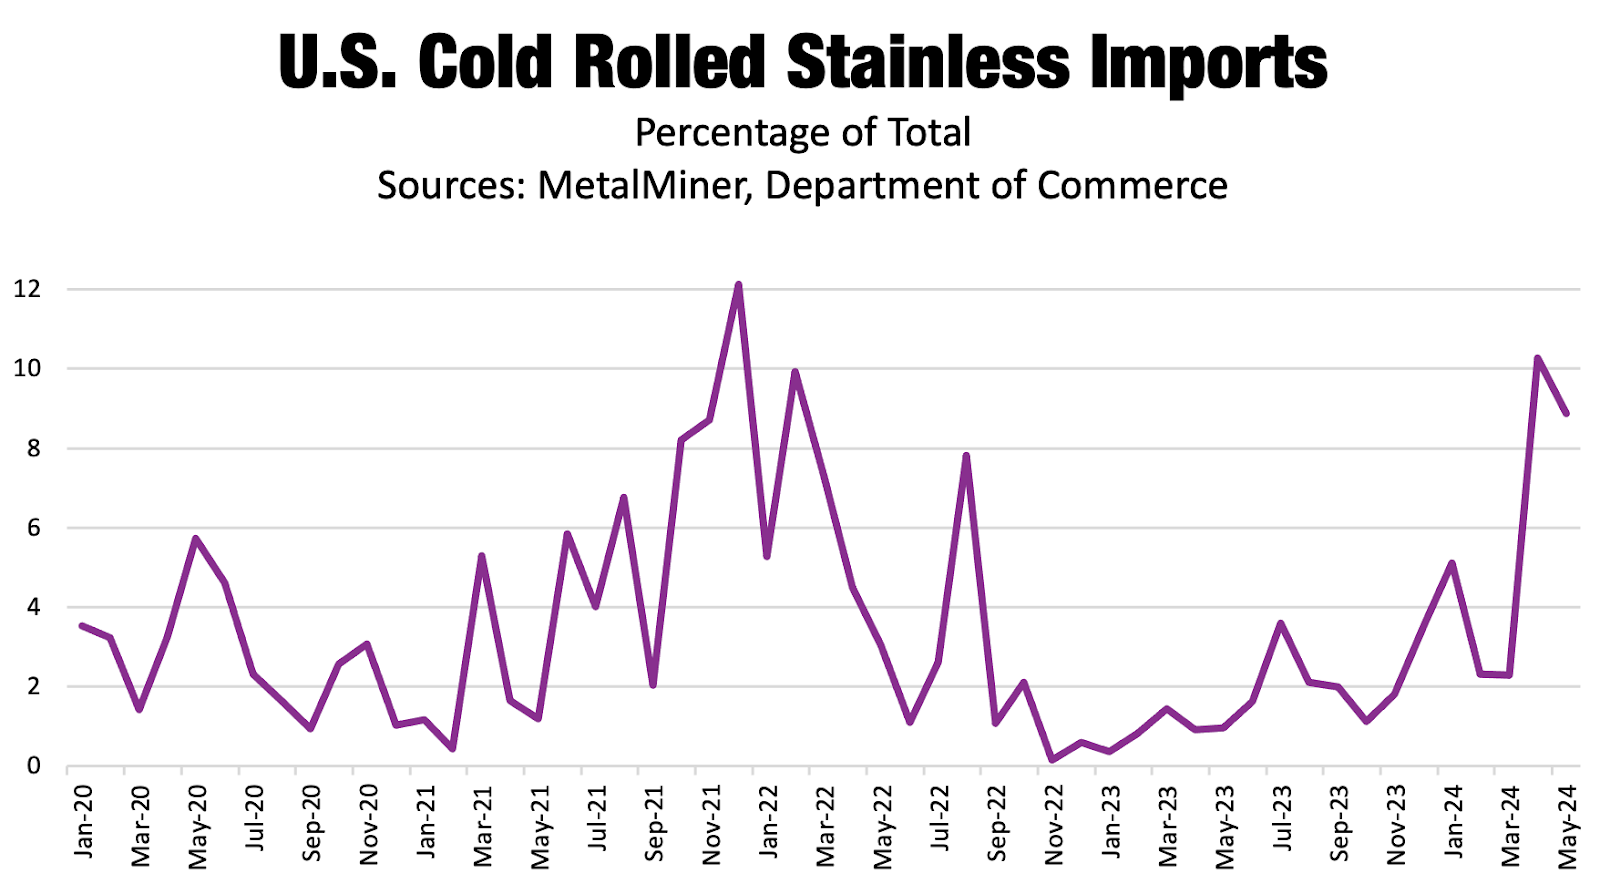 nickel price data: U.S. cold rolled stainless imports